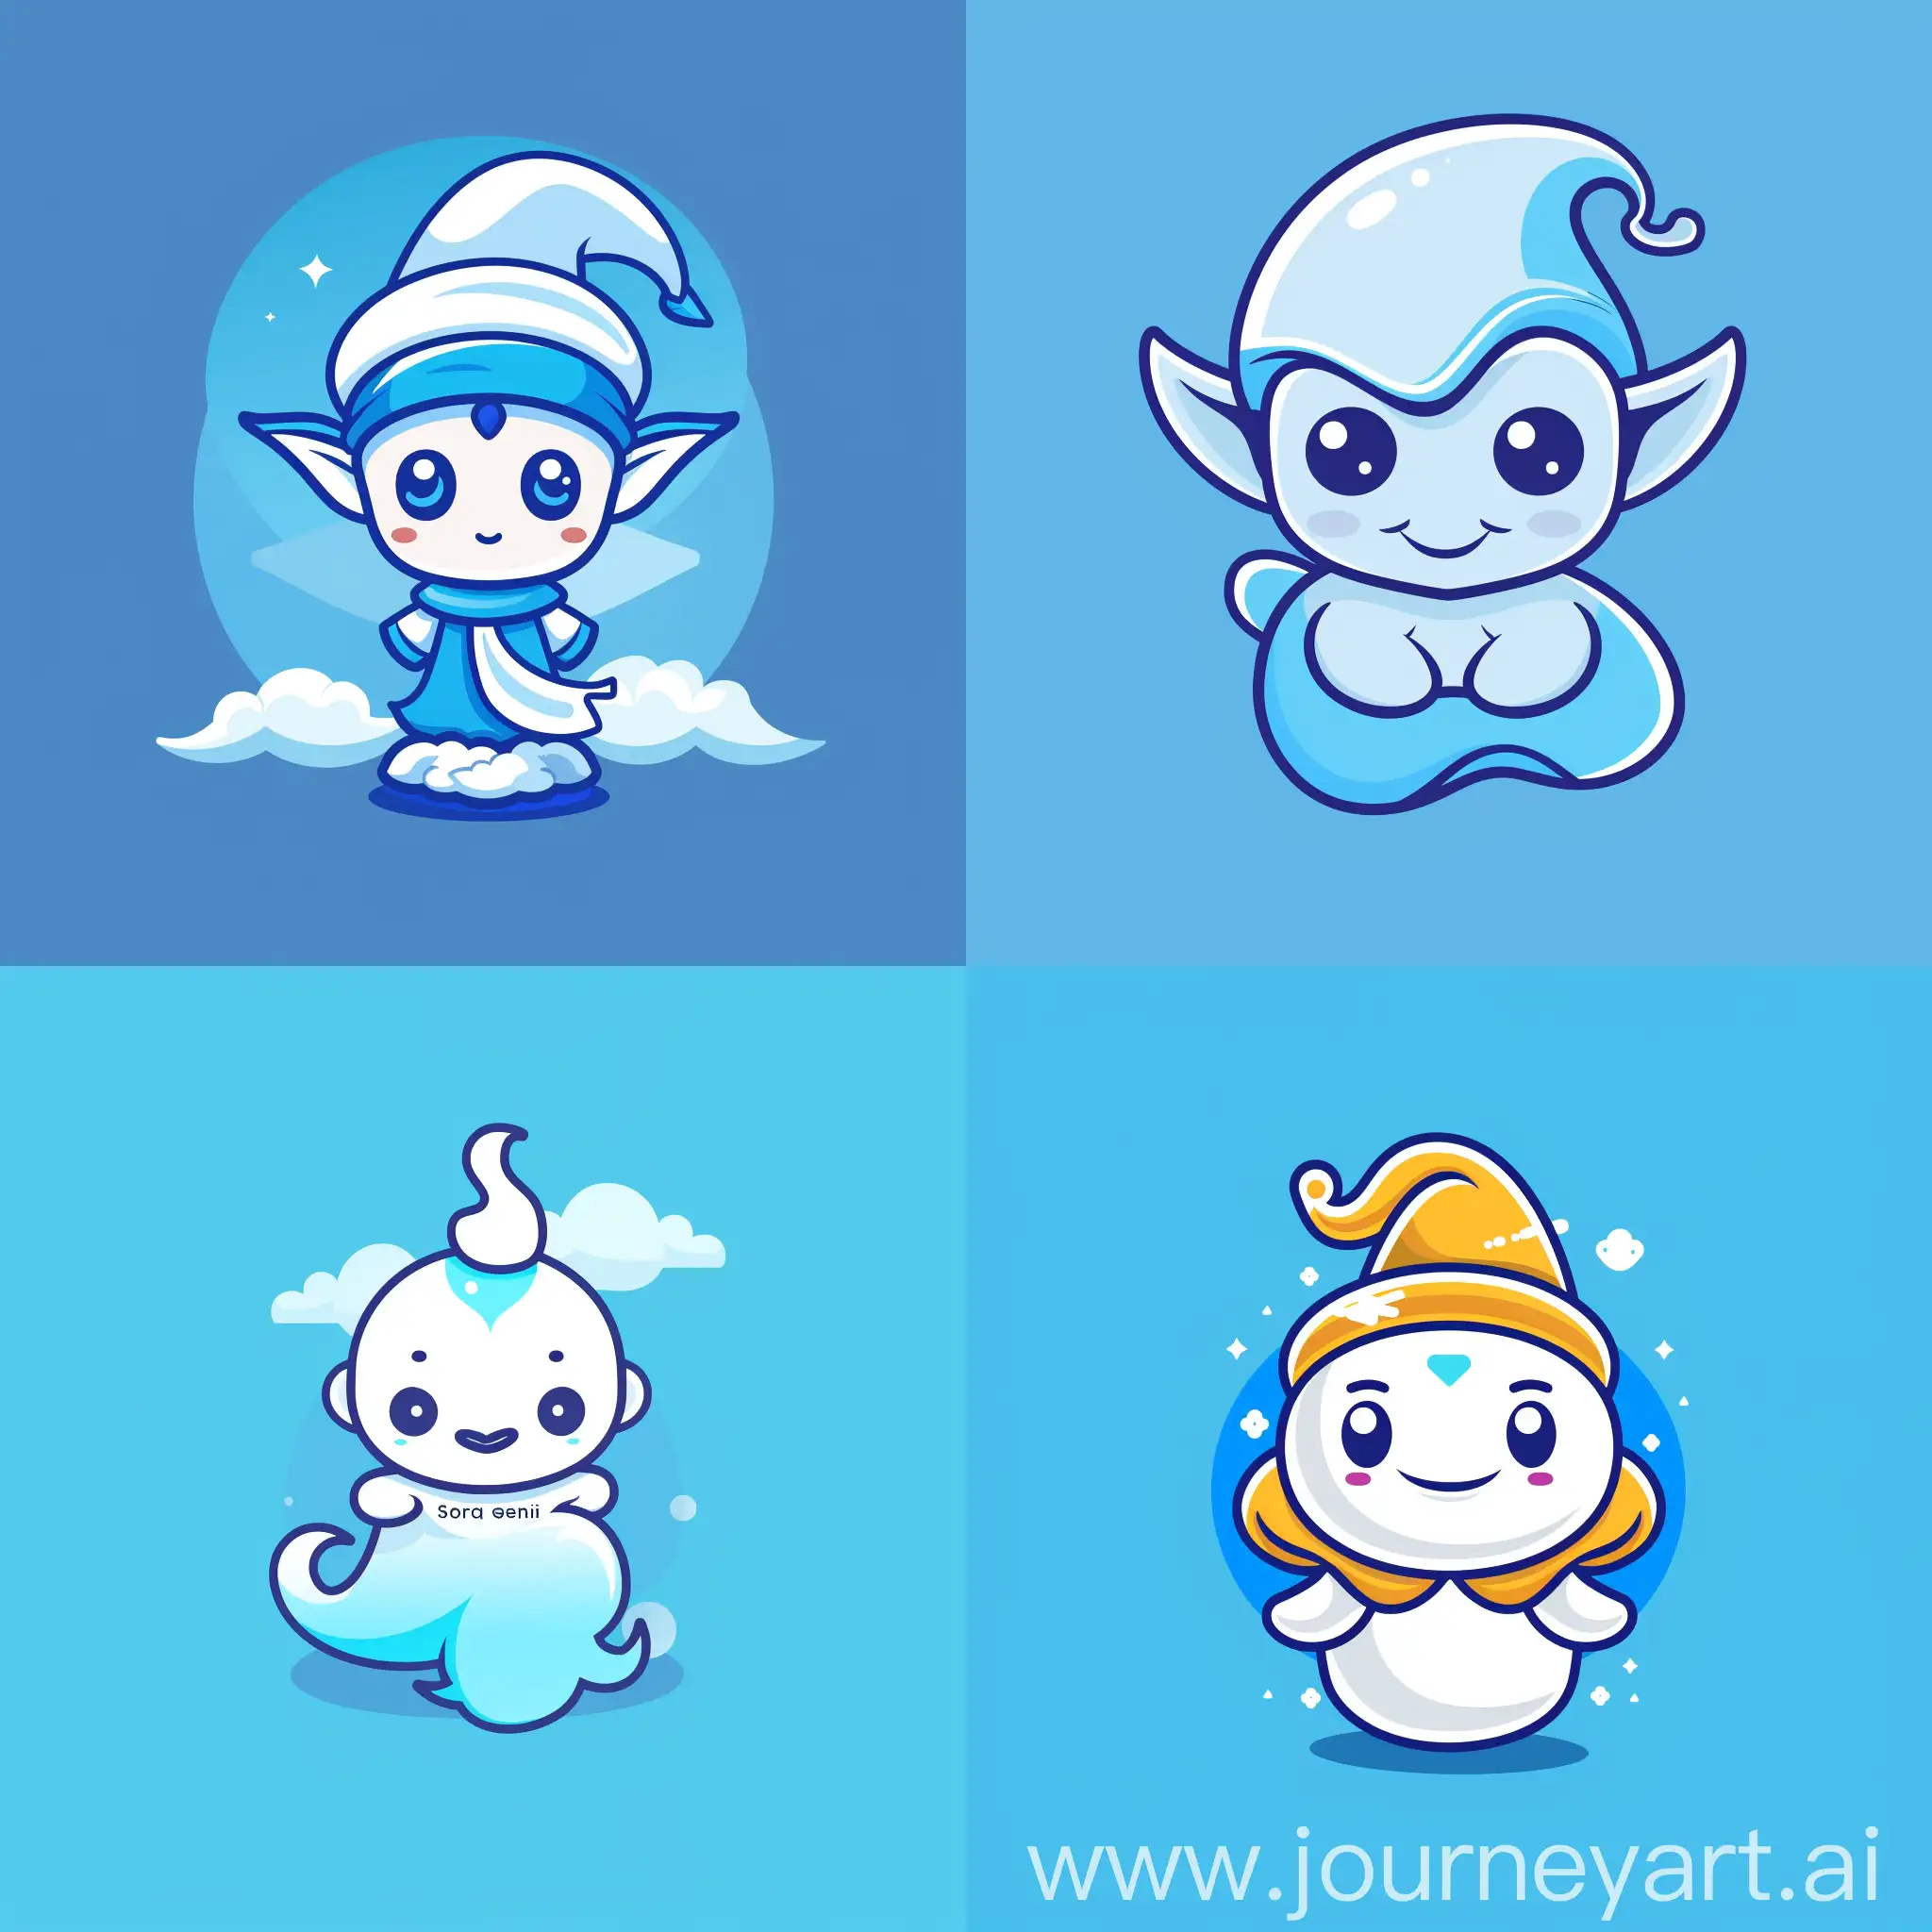 I want you to generate a logo for my startup SoraGeni, it should be essentially a cool cute genie with skyblue background here's info abt startup if you need: Build a large user base by offering GenAI tools and services directly on Telegram. Focused on quality service, great assistance, and excellent branding